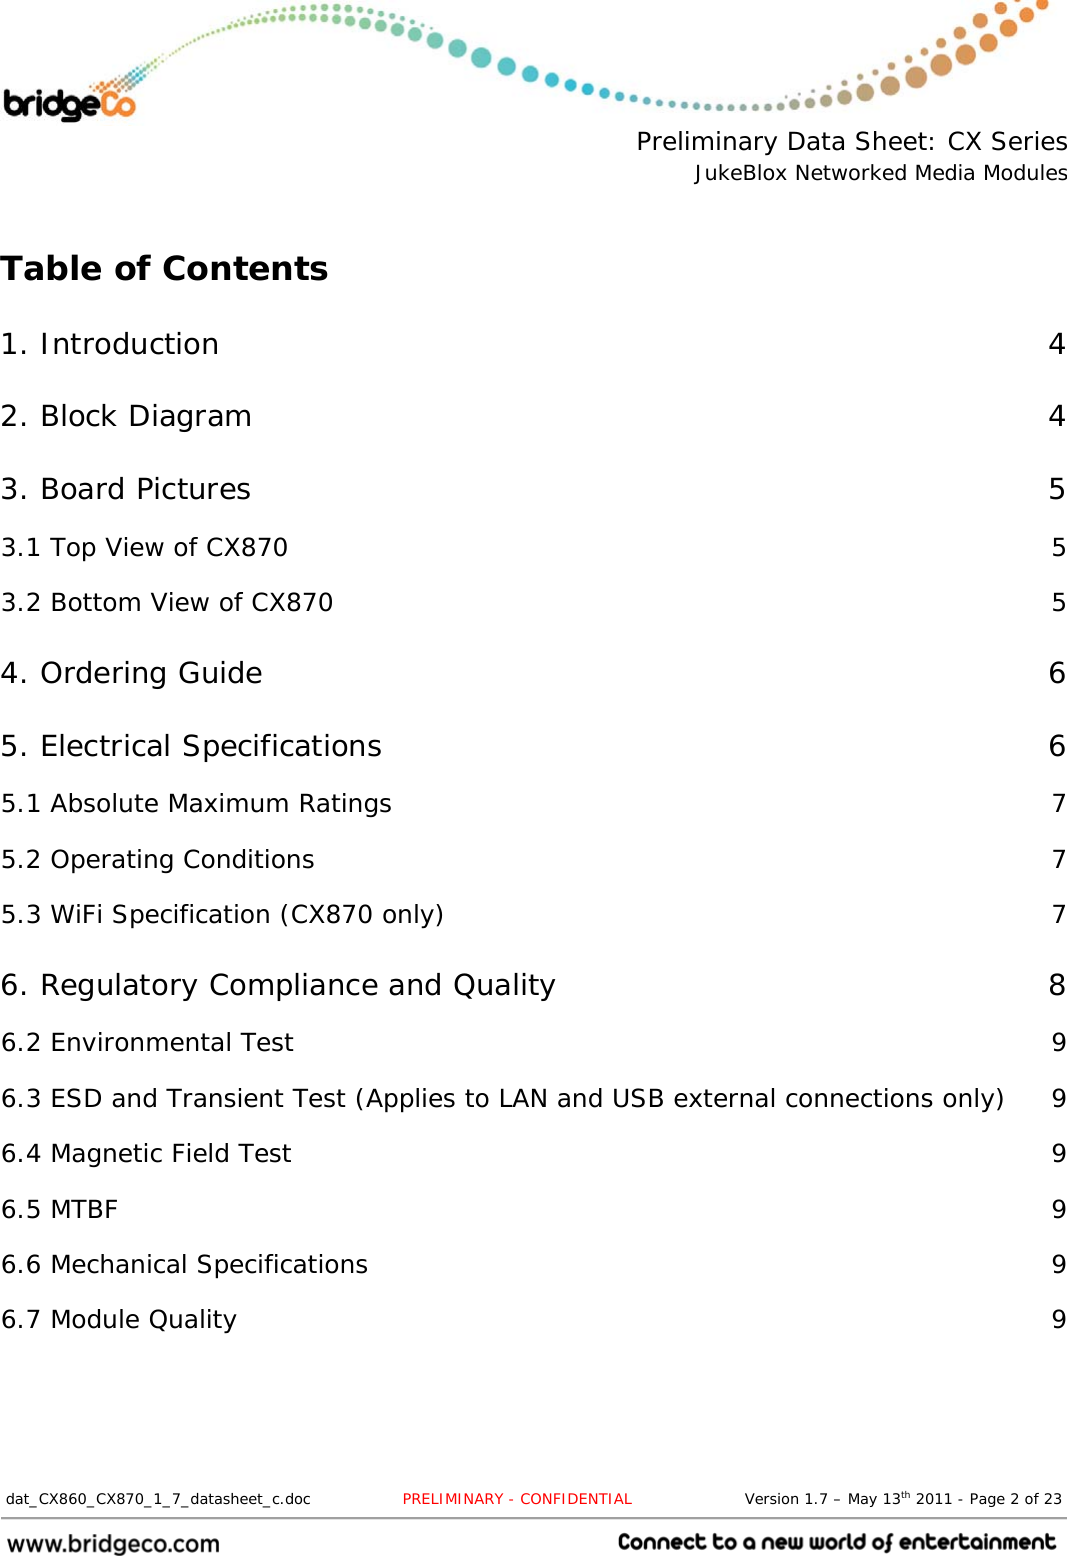  Preliminary Data Sheet: CX Series JukeBlox Networked Media Modules  dat_CX860_CX870_1_7_datasheet_c.doc                  PRELIMINARY - CONFIDENTIAL                      Version 1.7 – May 13th 2011 - Page 2 of 23                                  Table of Contents 1. Introduction  4 2. Block Diagram  4 3. Board Pictures  5 3.1 Top View of CX870  5 3.2 Bottom View of CX870  5 4. Ordering Guide  6 5. Electrical Specifications  6 5.1 Absolute Maximum Ratings  7 5.2 Operating Conditions  7 5.3 WiFi Specification (CX870 only)  7 6. Regulatory Compliance and Quality  8 6.2 Environmental Test  9 6.3 ESD and Transient Test (Applies to LAN and USB external connections only)  9 6.4 Magnetic Field Test  9 6.5 MTBF  9 6.6 Mechanical Specifications  9 6.7 Module Quality  9   